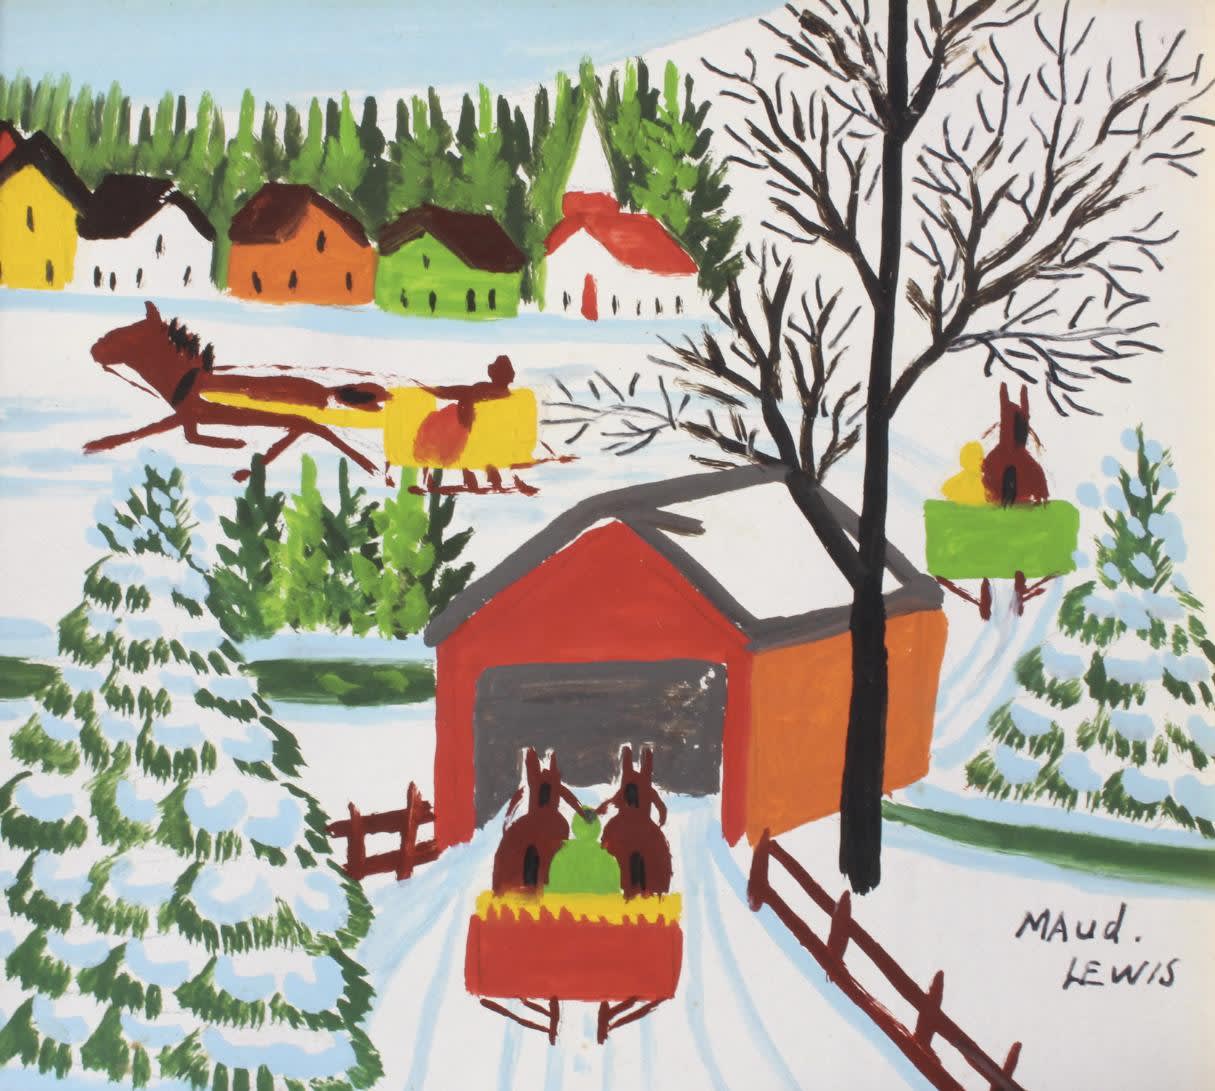 Maud Lewis; Horse Drawn Sleighs and Covered Bridge